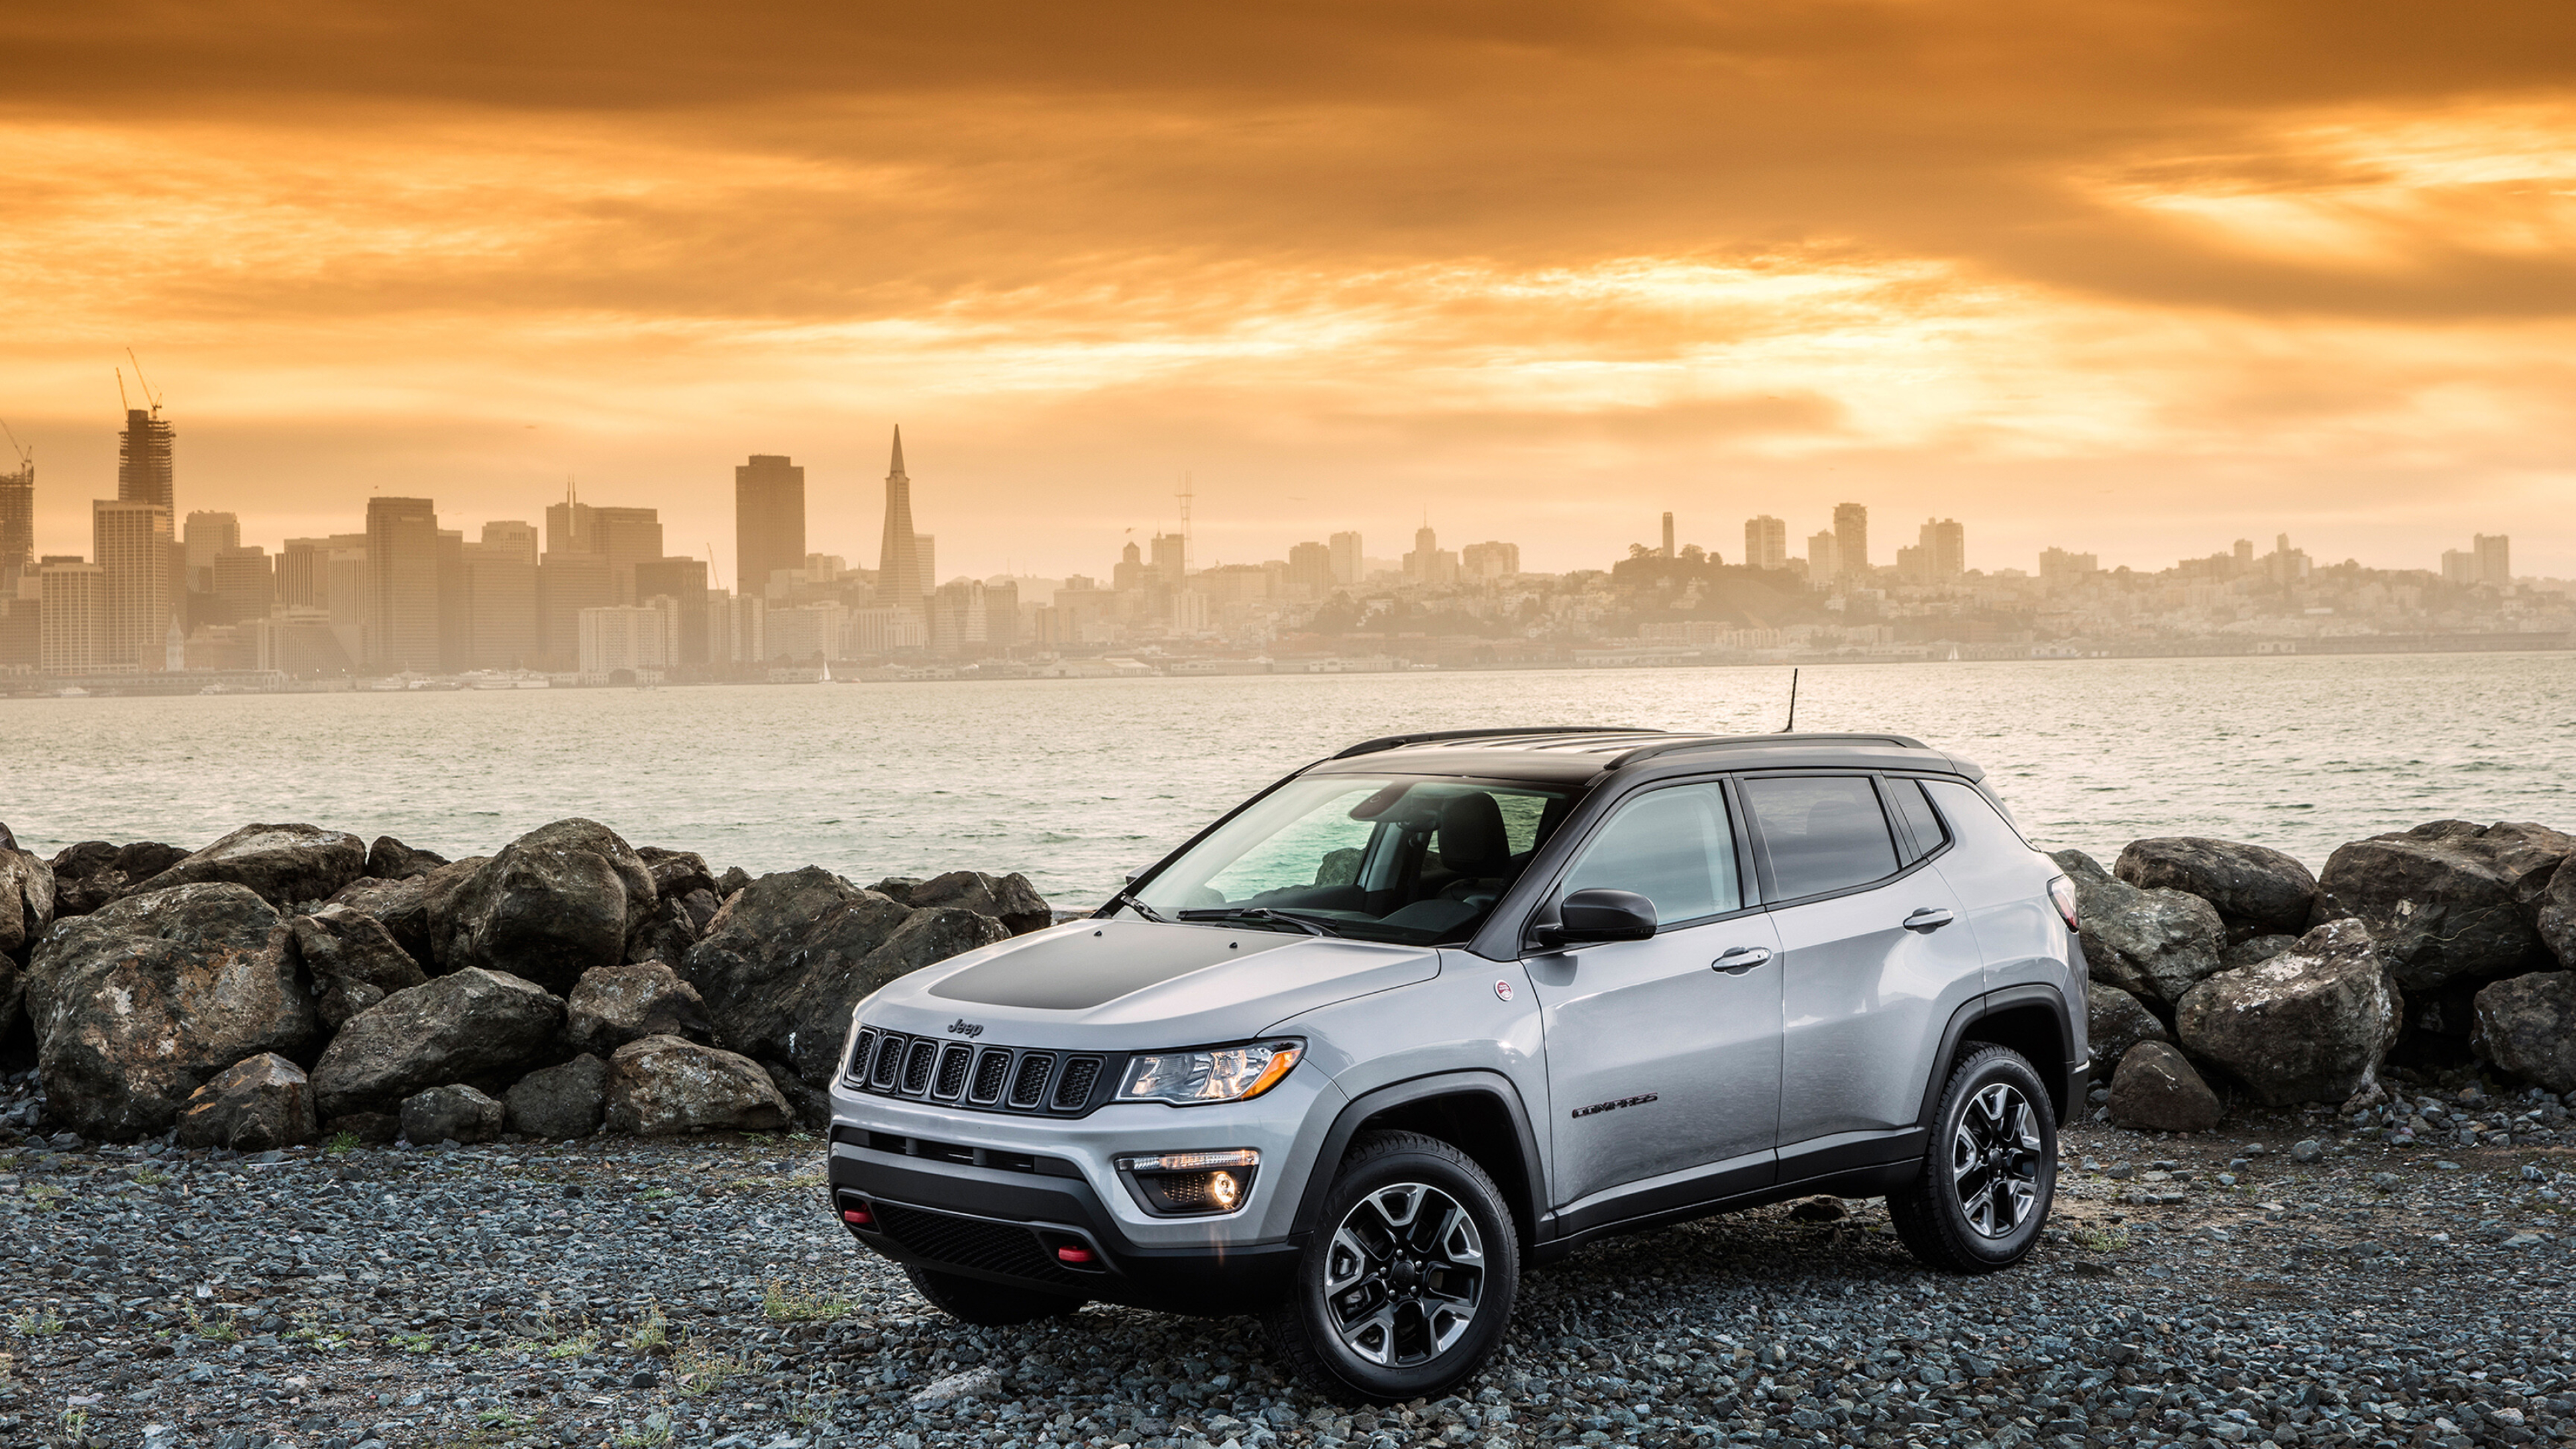 Jeep: The 2021 Compass Trailhawk, A 2.4-liter unleaded inline 4 multi-air engine. 3840x2160 4K Wallpaper.